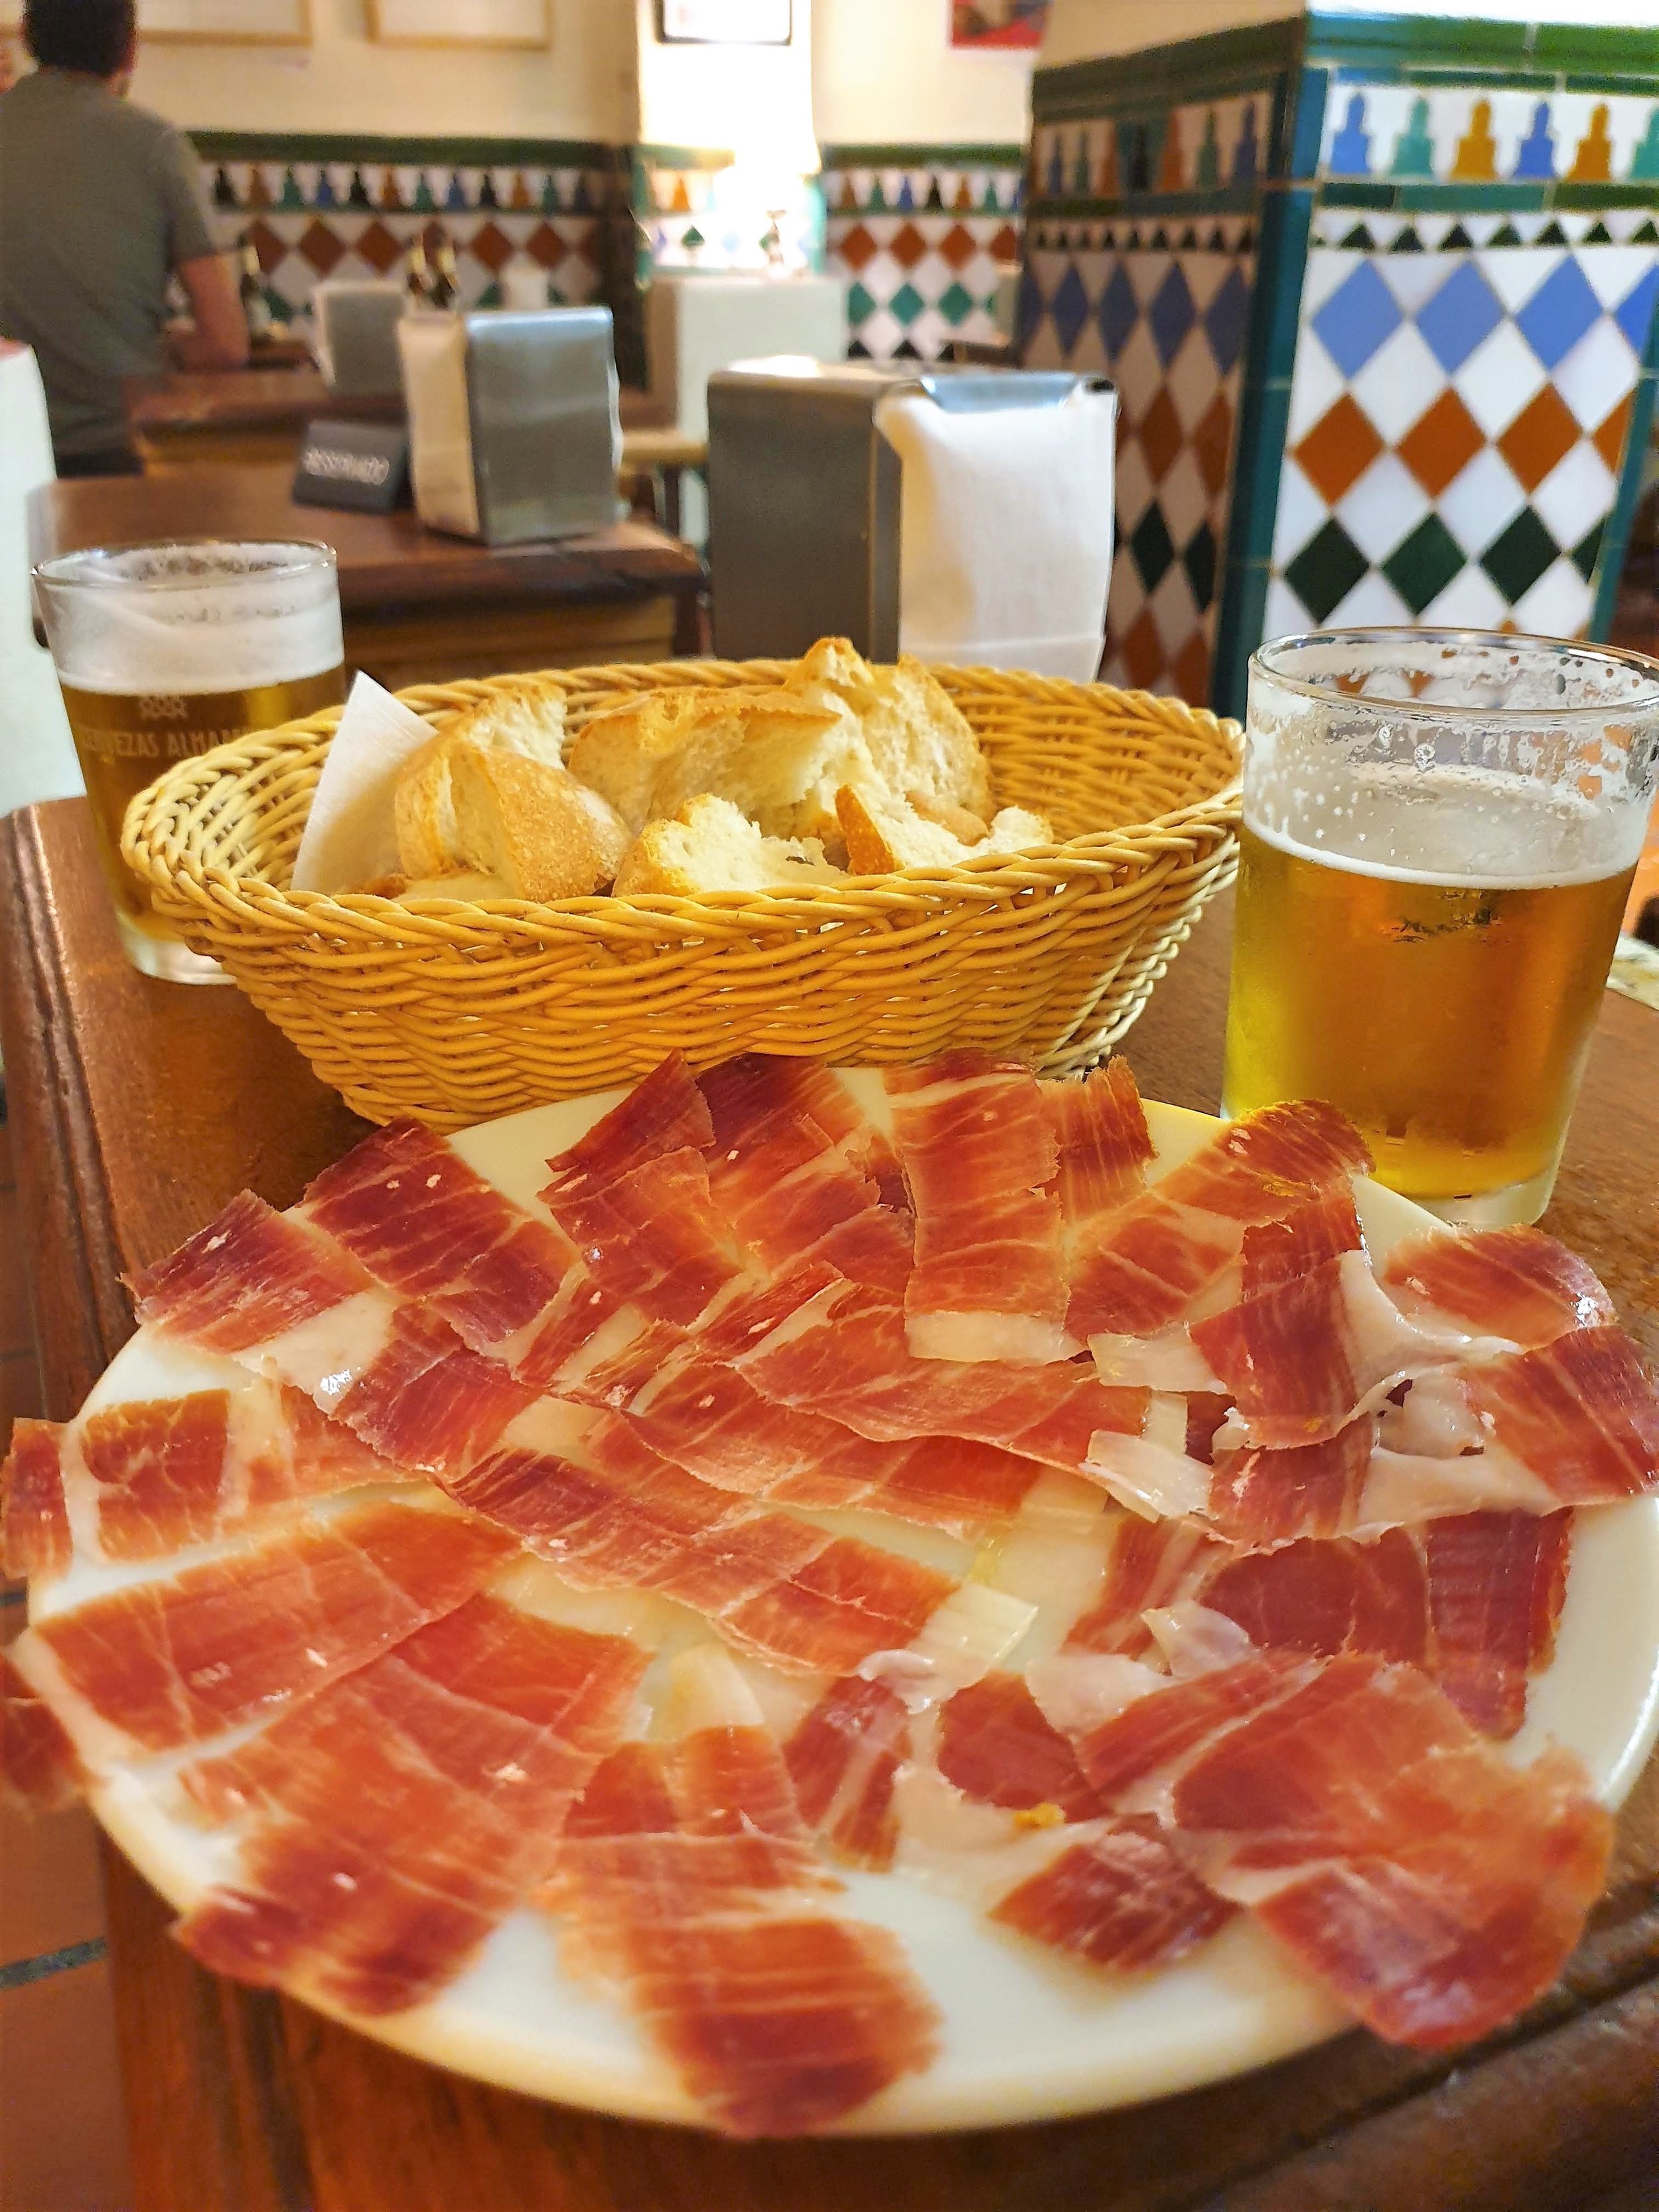 Be sure to savor the sensory experience of your ham, especially jamón de bellota which essentially melts in your mouth.